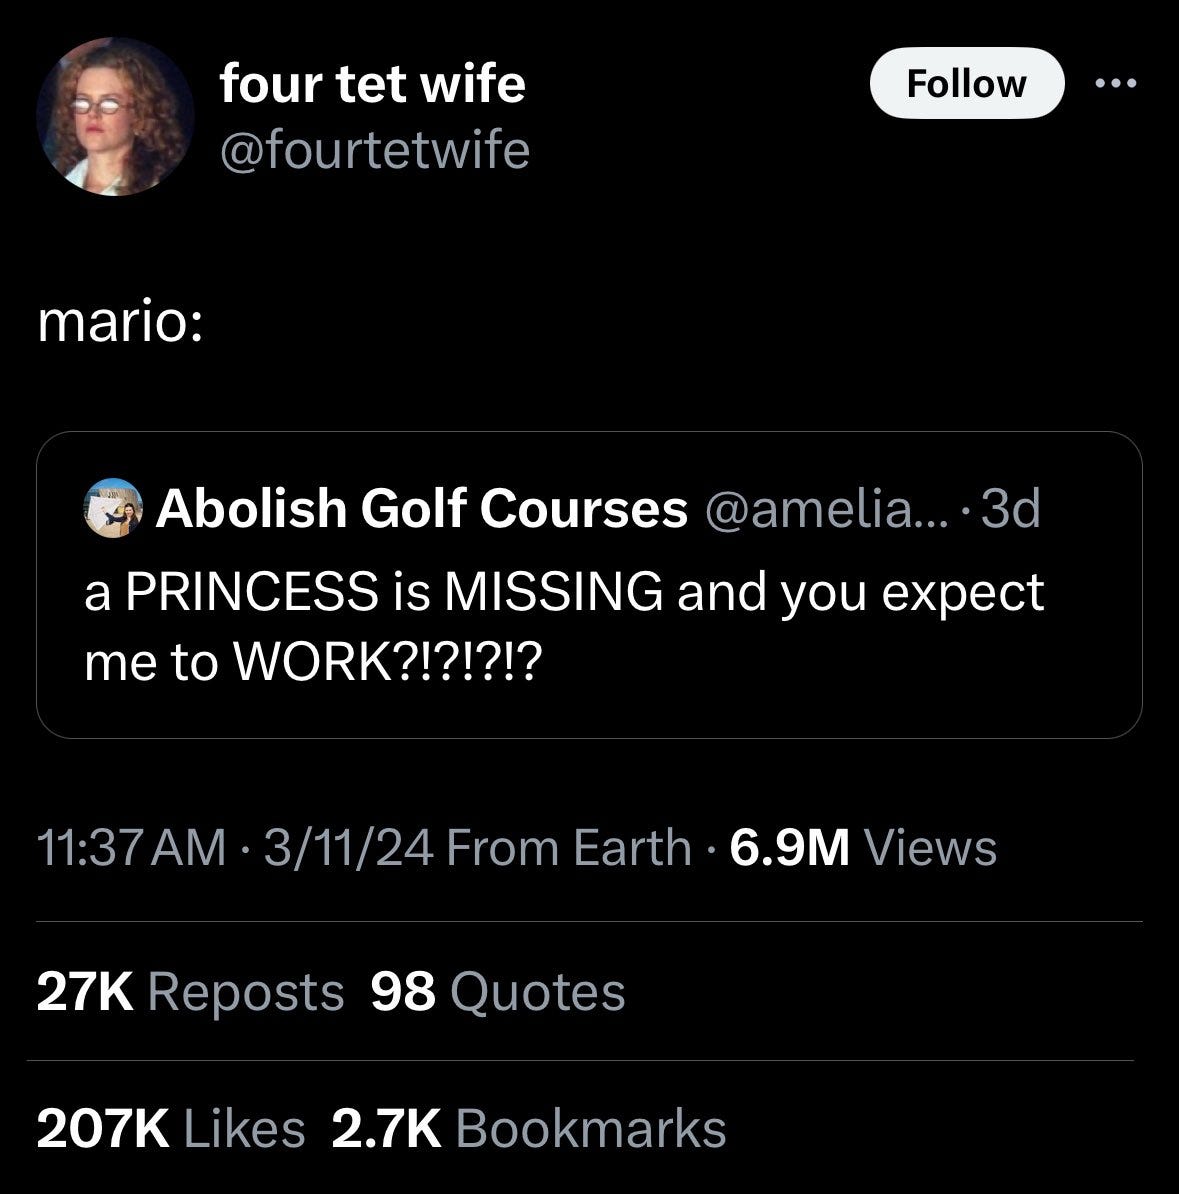 Tweet screenshot. Mario: A princess is missing and you expect me to WORK?